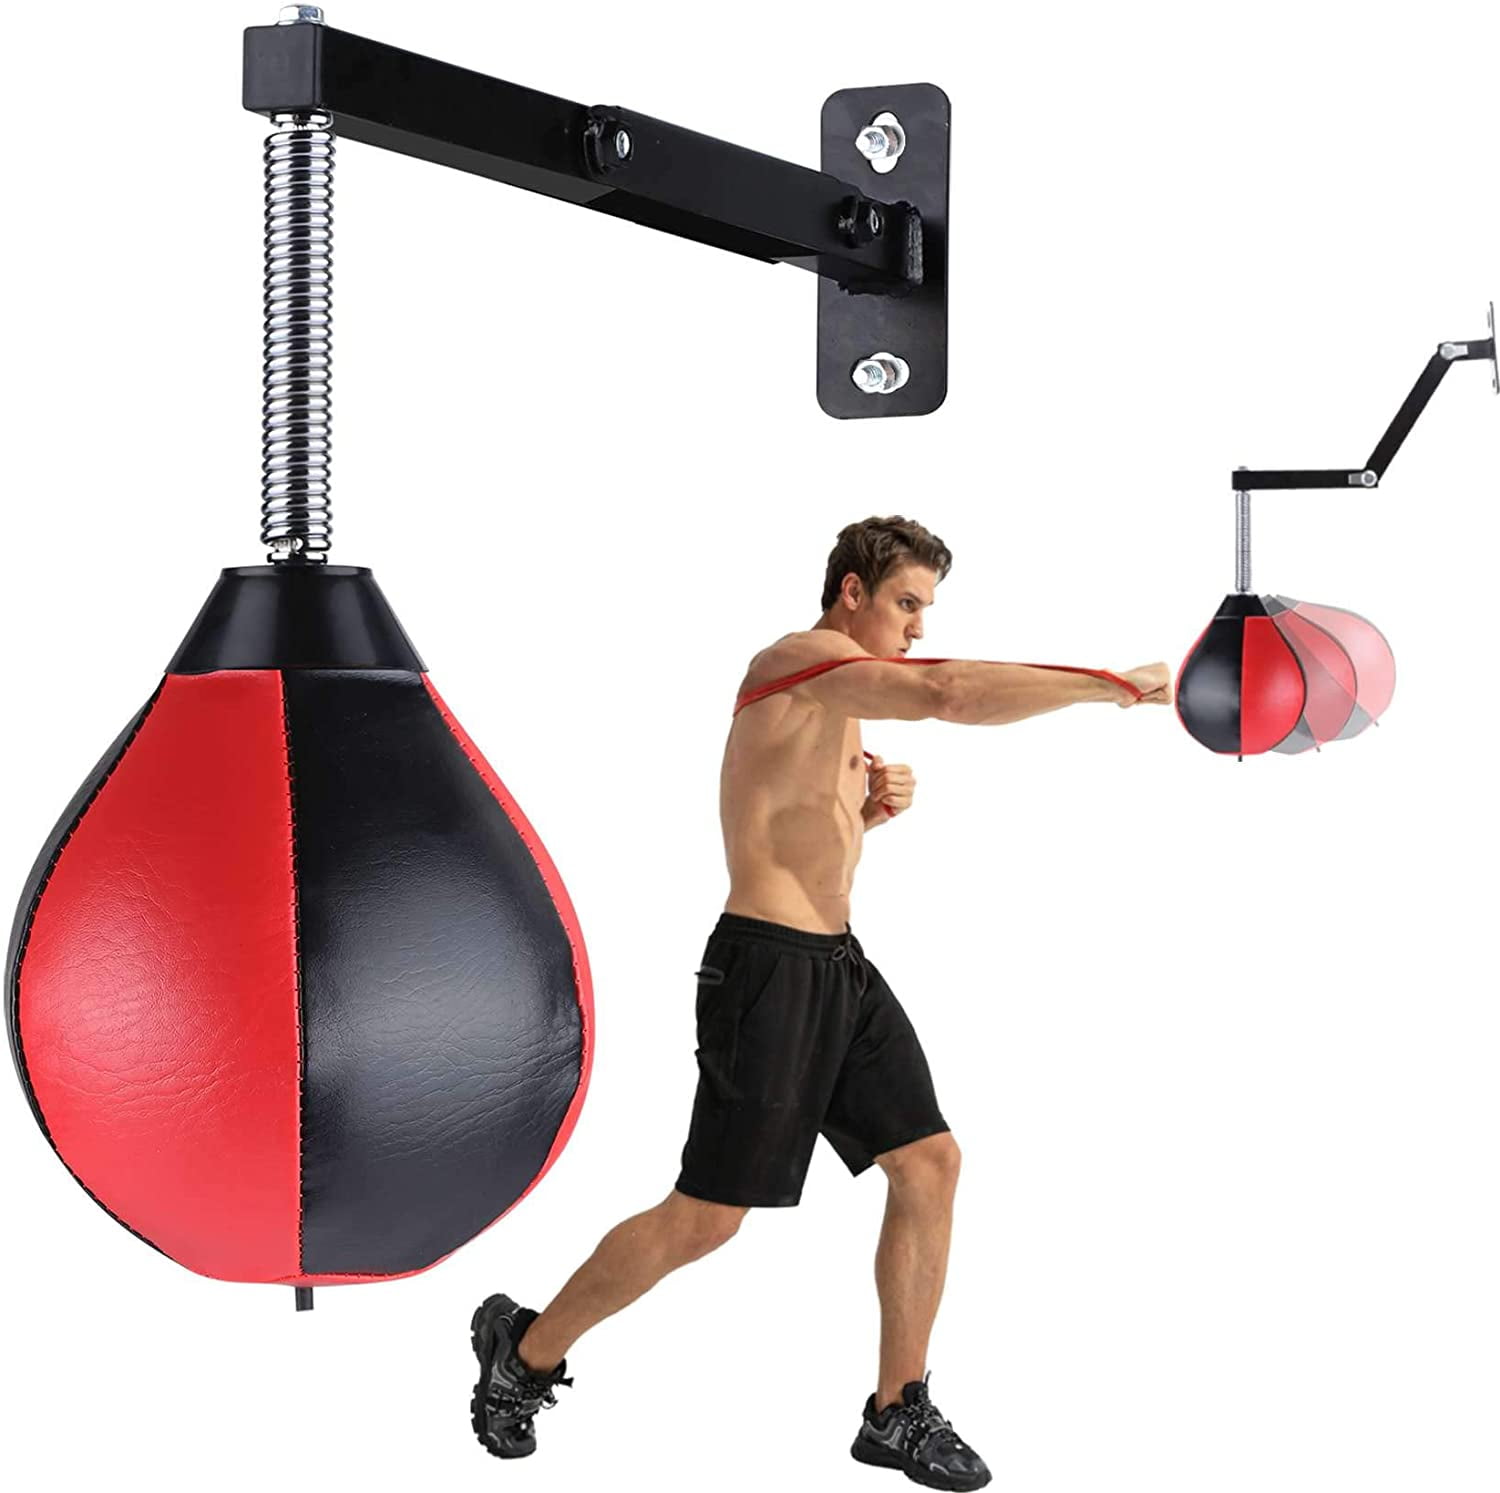 Punching Bag Wall Mount with Spring Punching Bag Reflex Speed Bag Wall Hanging Wall-Mounted Strong Durable Boxing Ball Relief Stress Exercise for Kids Adults Home Office Gym Men Women